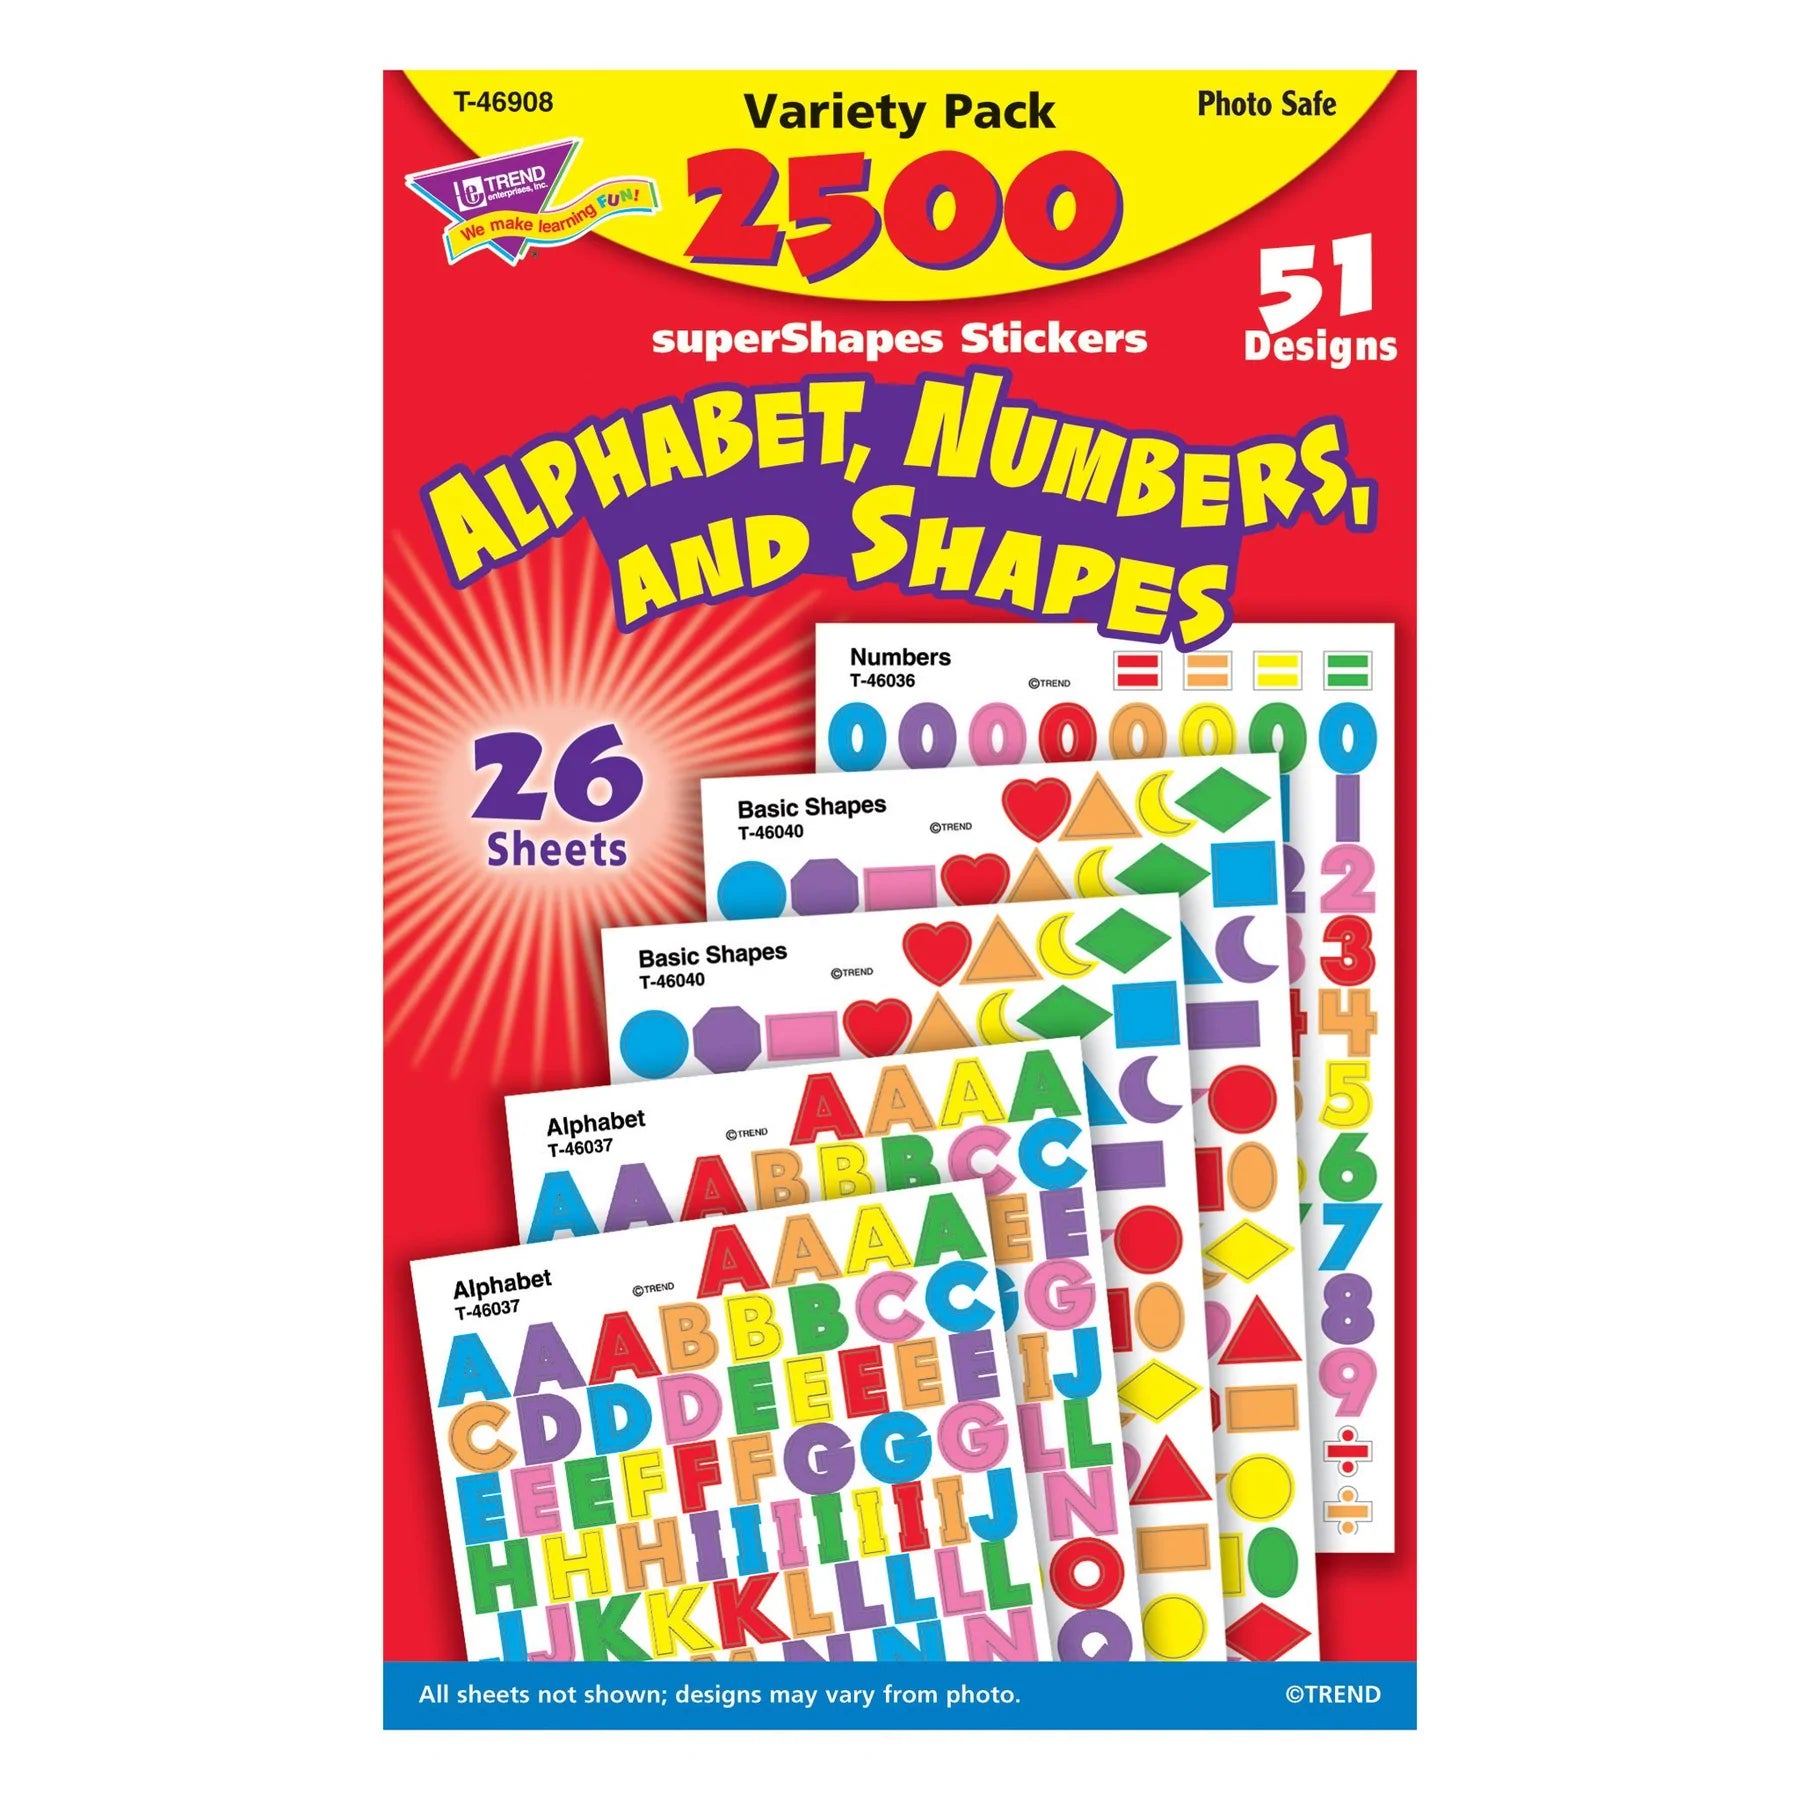 Trend Alphabet, Numbers, & Shapes SuperShapes Stickers Variety Pack (T-46908)